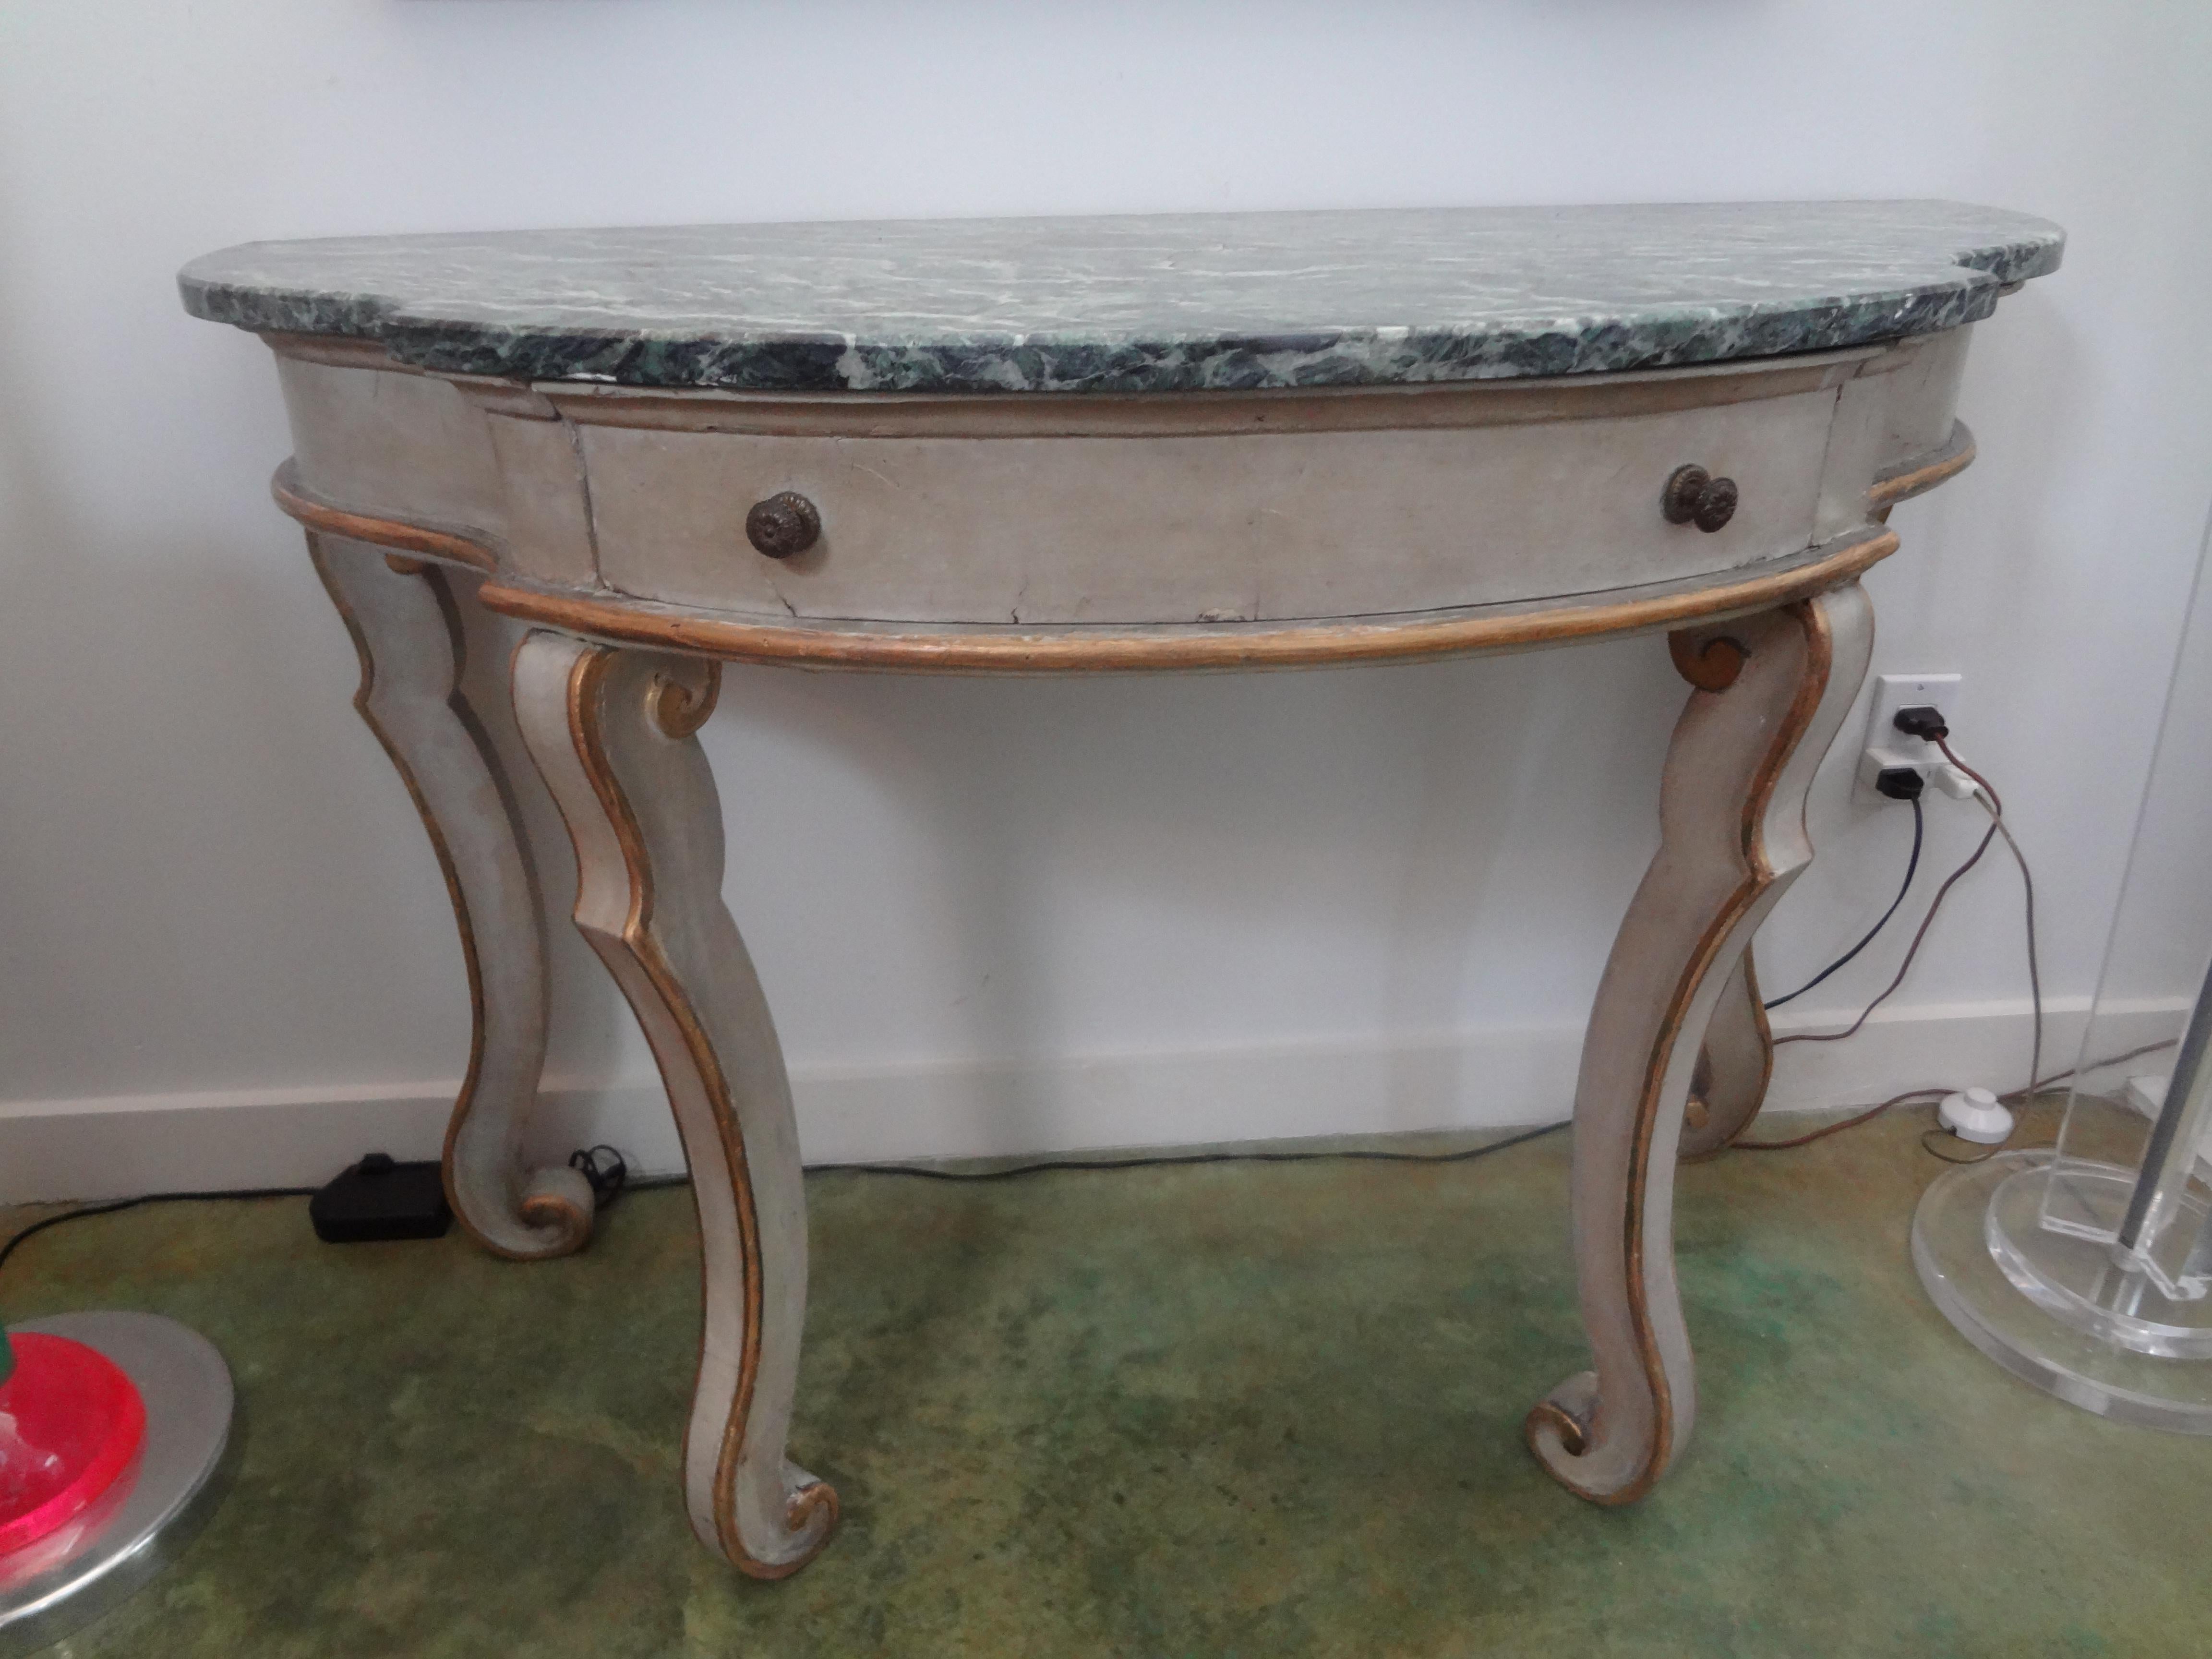 Pair of Italian console tables, painted and giltwood.
Pair of Italian painted and gilt wood freestanding console tables. Stunning pair of Italian Neoclassical style painted and giltwood console tables. This stylish well-proportioned pair of Italian